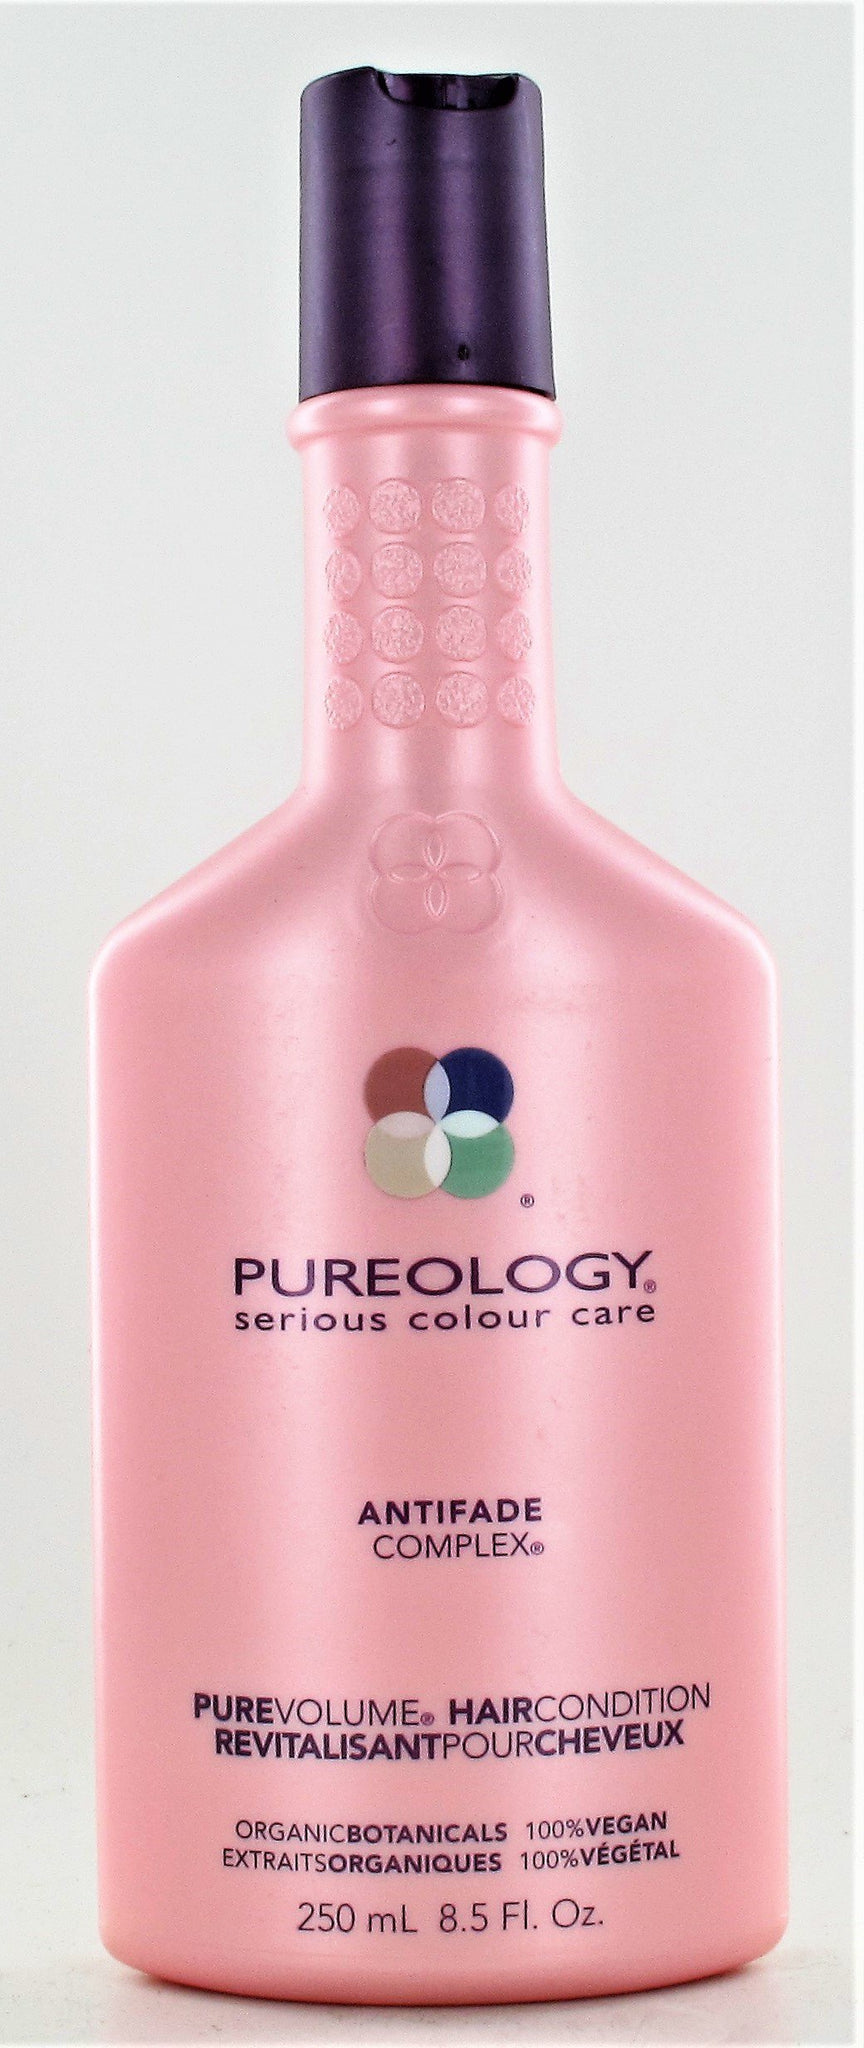 Pureology AntiFade Complex Pure Volume Hair Conditioner 8.5 oz